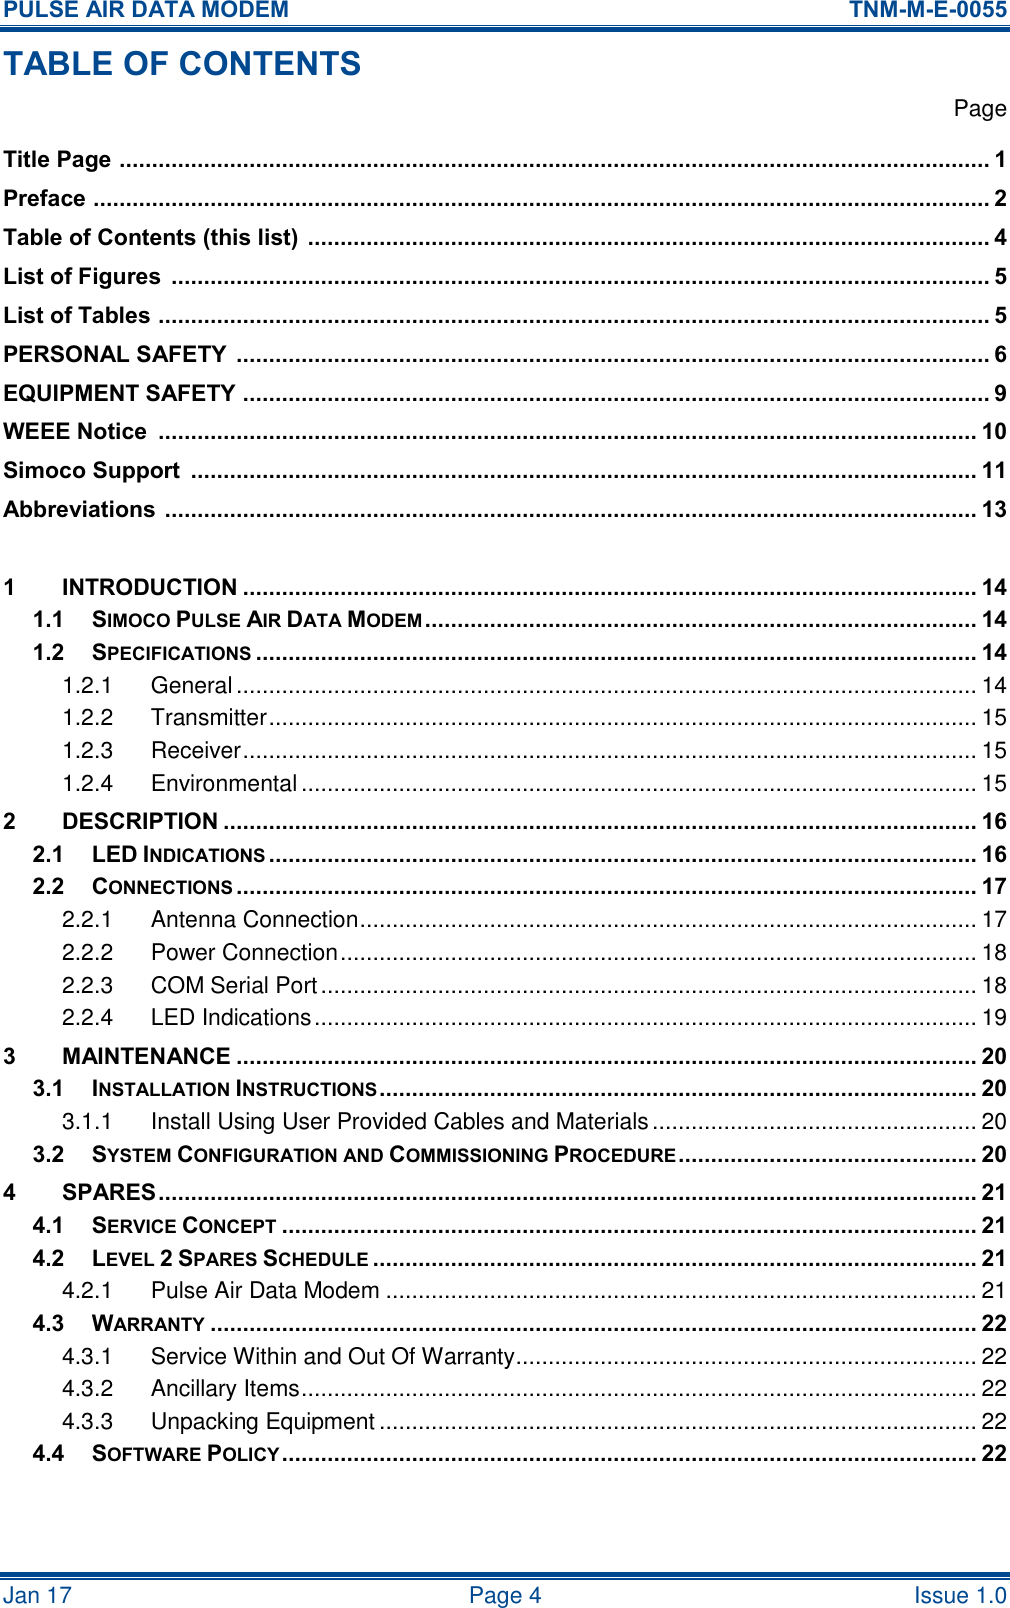 PULSE AIR DATA MODEM  TNM-M-E-0055 Jan 17   Page 4  Issue 1.0 TABLE OF CONTENTS   Page Title Page  ...................................................................................................................................... 1 Preface  .......................................................................................................................................... 2 Table of Contents (this list)  ......................................................................................................... 4 List of Figures  .............................................................................................................................. 5 List of Tables  ................................................................................................................................ 5 PERSONAL SAFETY  .................................................................................................................... 6 EQUIPMENT SAFETY ................................................................................................................... 9 WEEE Notice  .............................................................................................................................. 10 Simoco Support  ......................................................................................................................... 11 Abbreviations  ............................................................................................................................. 13  1 INTRODUCTION ................................................................................................................. 14 1.1 SIMOCO PULSE AIR DATA MODEM ..................................................................................... 14 1.2 SPECIFICATIONS ............................................................................................................... 14 1.2.1 General .................................................................................................................. 14 1.2.2 Transmitter ............................................................................................................. 15 1.2.3 Receiver ................................................................................................................. 15 1.2.4 Environmental ........................................................................................................ 15 2 DESCRIPTION .................................................................................................................... 16 2.1 LED INDICATIONS ............................................................................................................. 16 2.2 CONNECTIONS .................................................................................................................. 17 2.2.1 Antenna Connection ............................................................................................... 17 2.2.2 Power Connection .................................................................................................. 18 2.2.3 COM Serial Port ..................................................................................................... 18 2.2.4 LED Indications ...................................................................................................... 19 3 MAINTENANCE .................................................................................................................. 20 3.1 INSTALLATION INSTRUCTIONS ............................................................................................ 20 3.1.1 Install Using User Provided Cables and Materials .................................................. 20 3.2 SYSTEM CONFIGURATION AND COMMISSIONING PROCEDURE .............................................. 20 4 SPARES .............................................................................................................................. 21 4.1 SERVICE CONCEPT ........................................................................................................... 21 4.2 LEVEL 2 SPARES SCHEDULE ............................................................................................. 21 4.2.1 Pulse Air Data Modem ........................................................................................... 21 4.3 WARRANTY ...................................................................................................................... 22 4.3.1 Service Within and Out Of Warranty ....................................................................... 22 4.3.2 Ancillary Items ........................................................................................................ 22 4.3.3 Unpacking Equipment ............................................................................................ 22 4.4 SOFTWARE POLICY ........................................................................................................... 22   